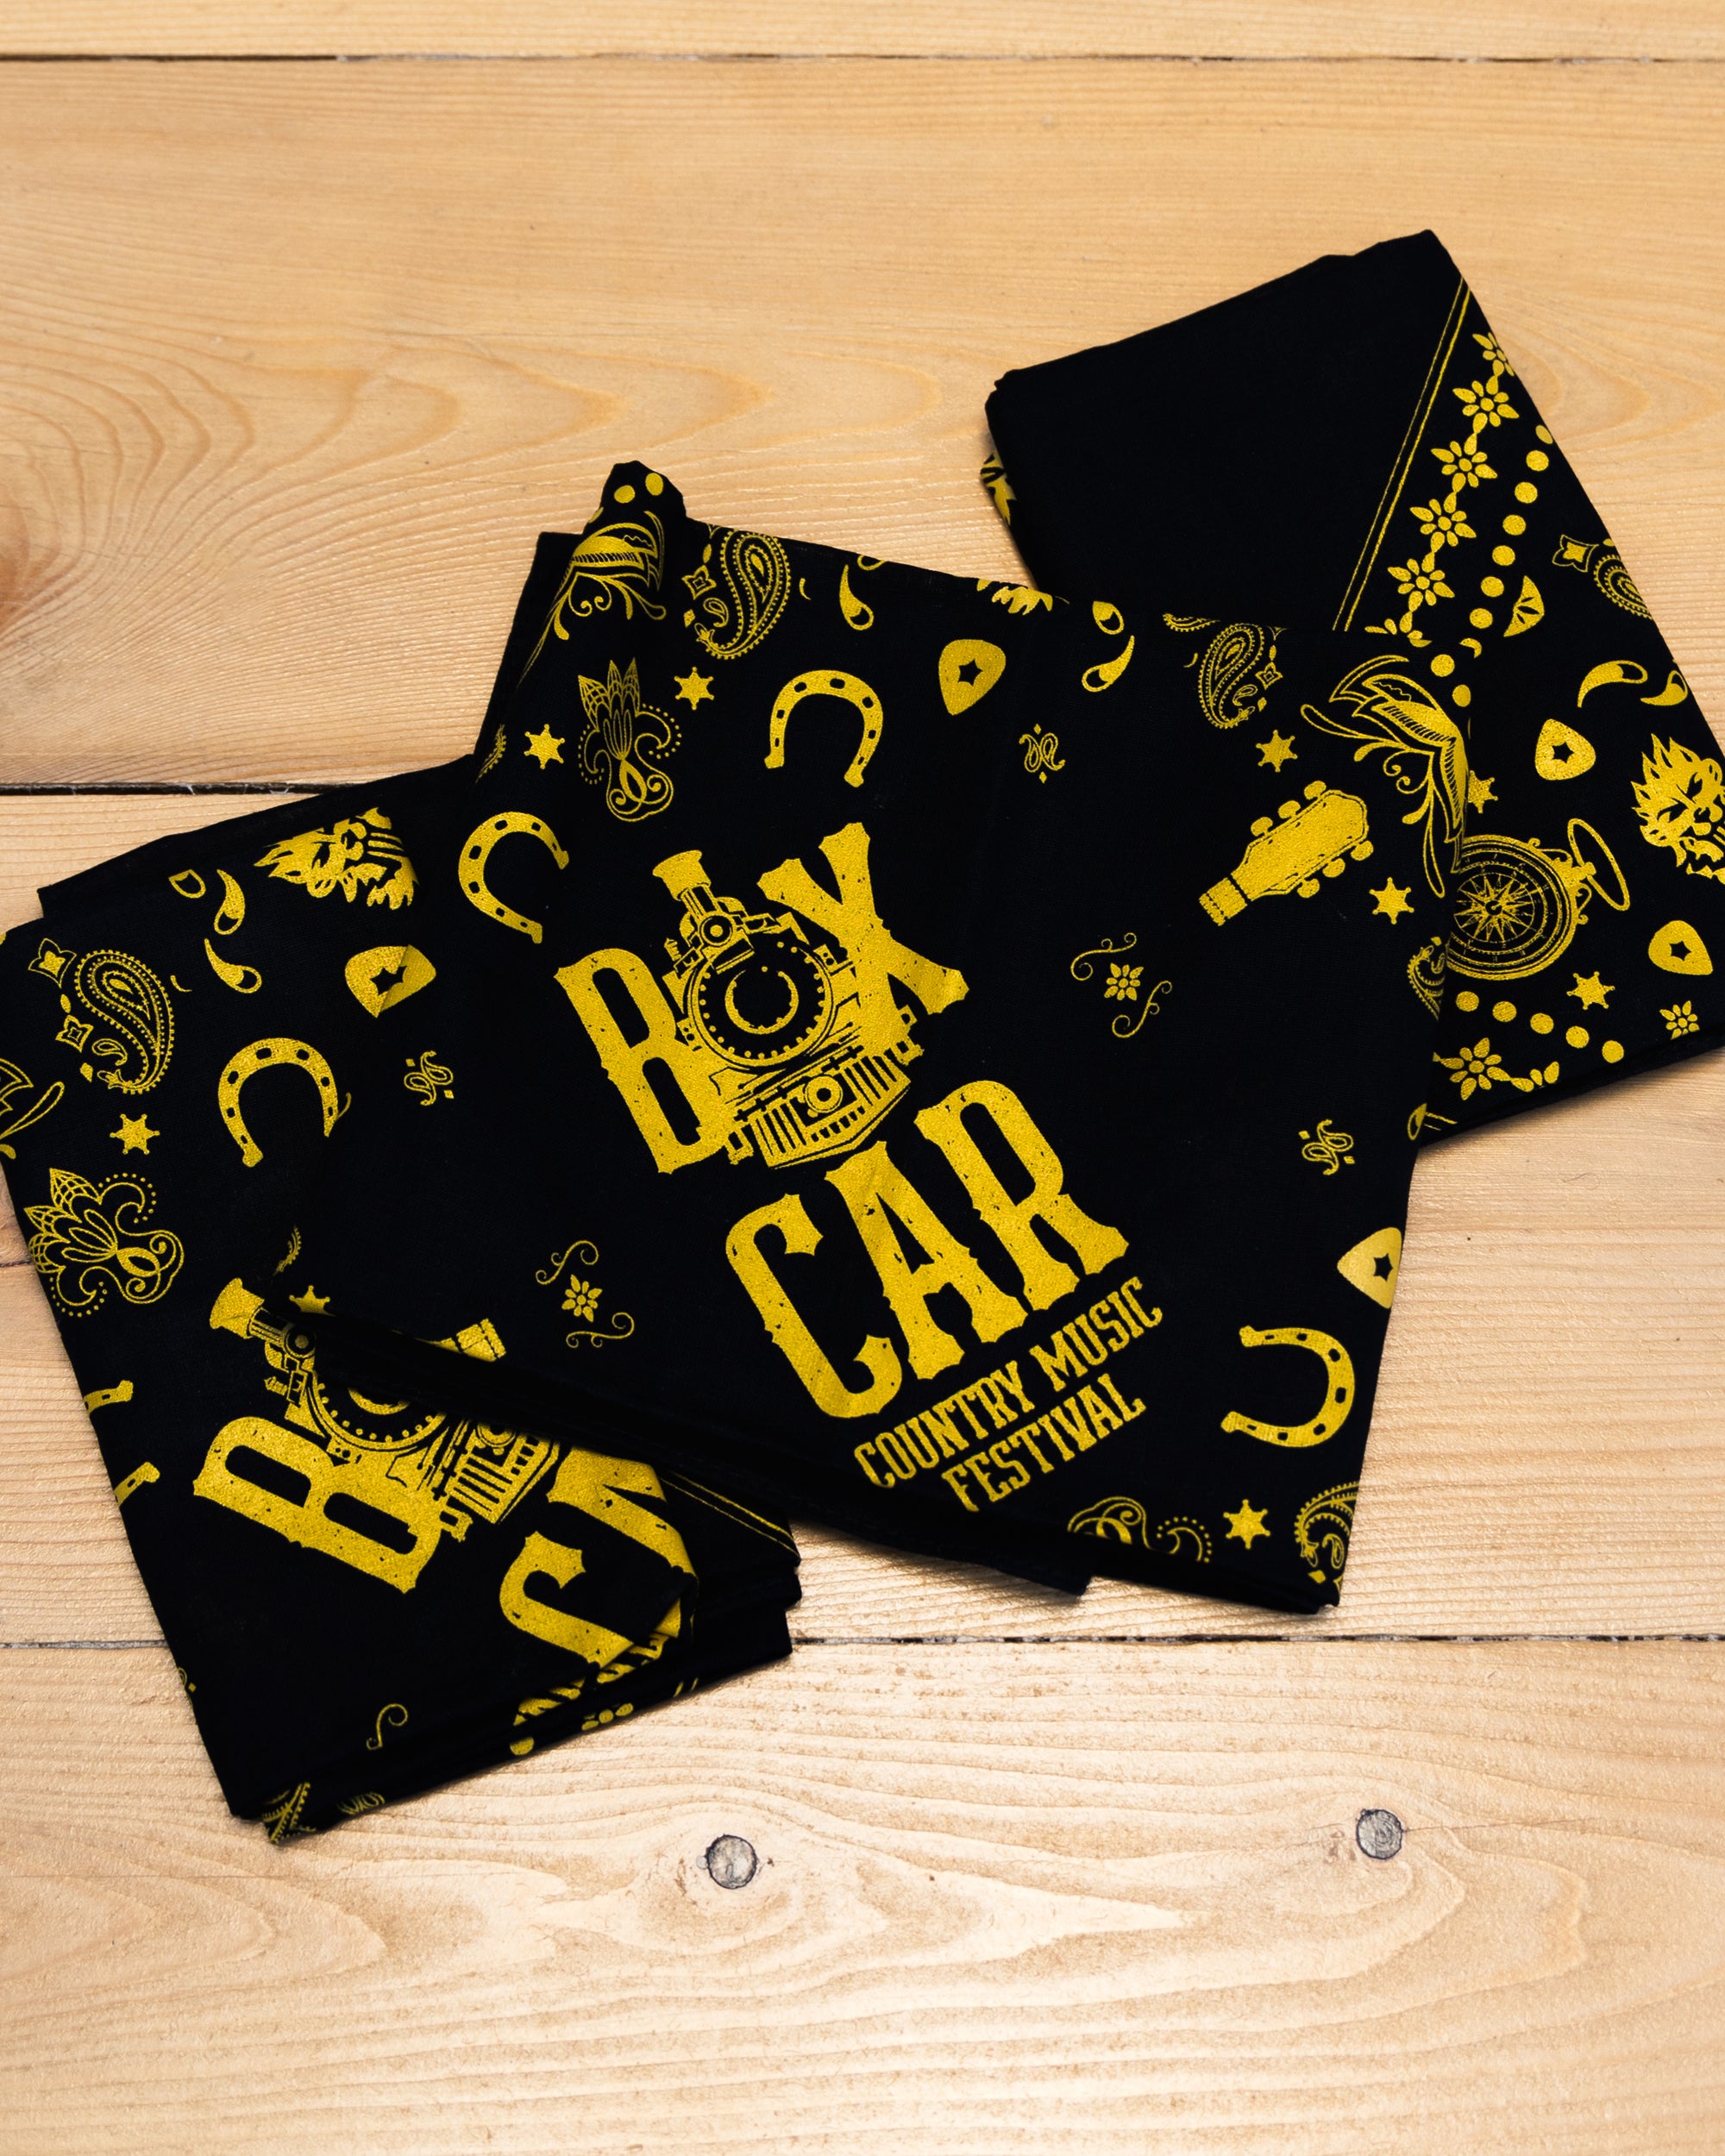 Black bandana with light brown imagery and Boxcar Country Music Festival text.